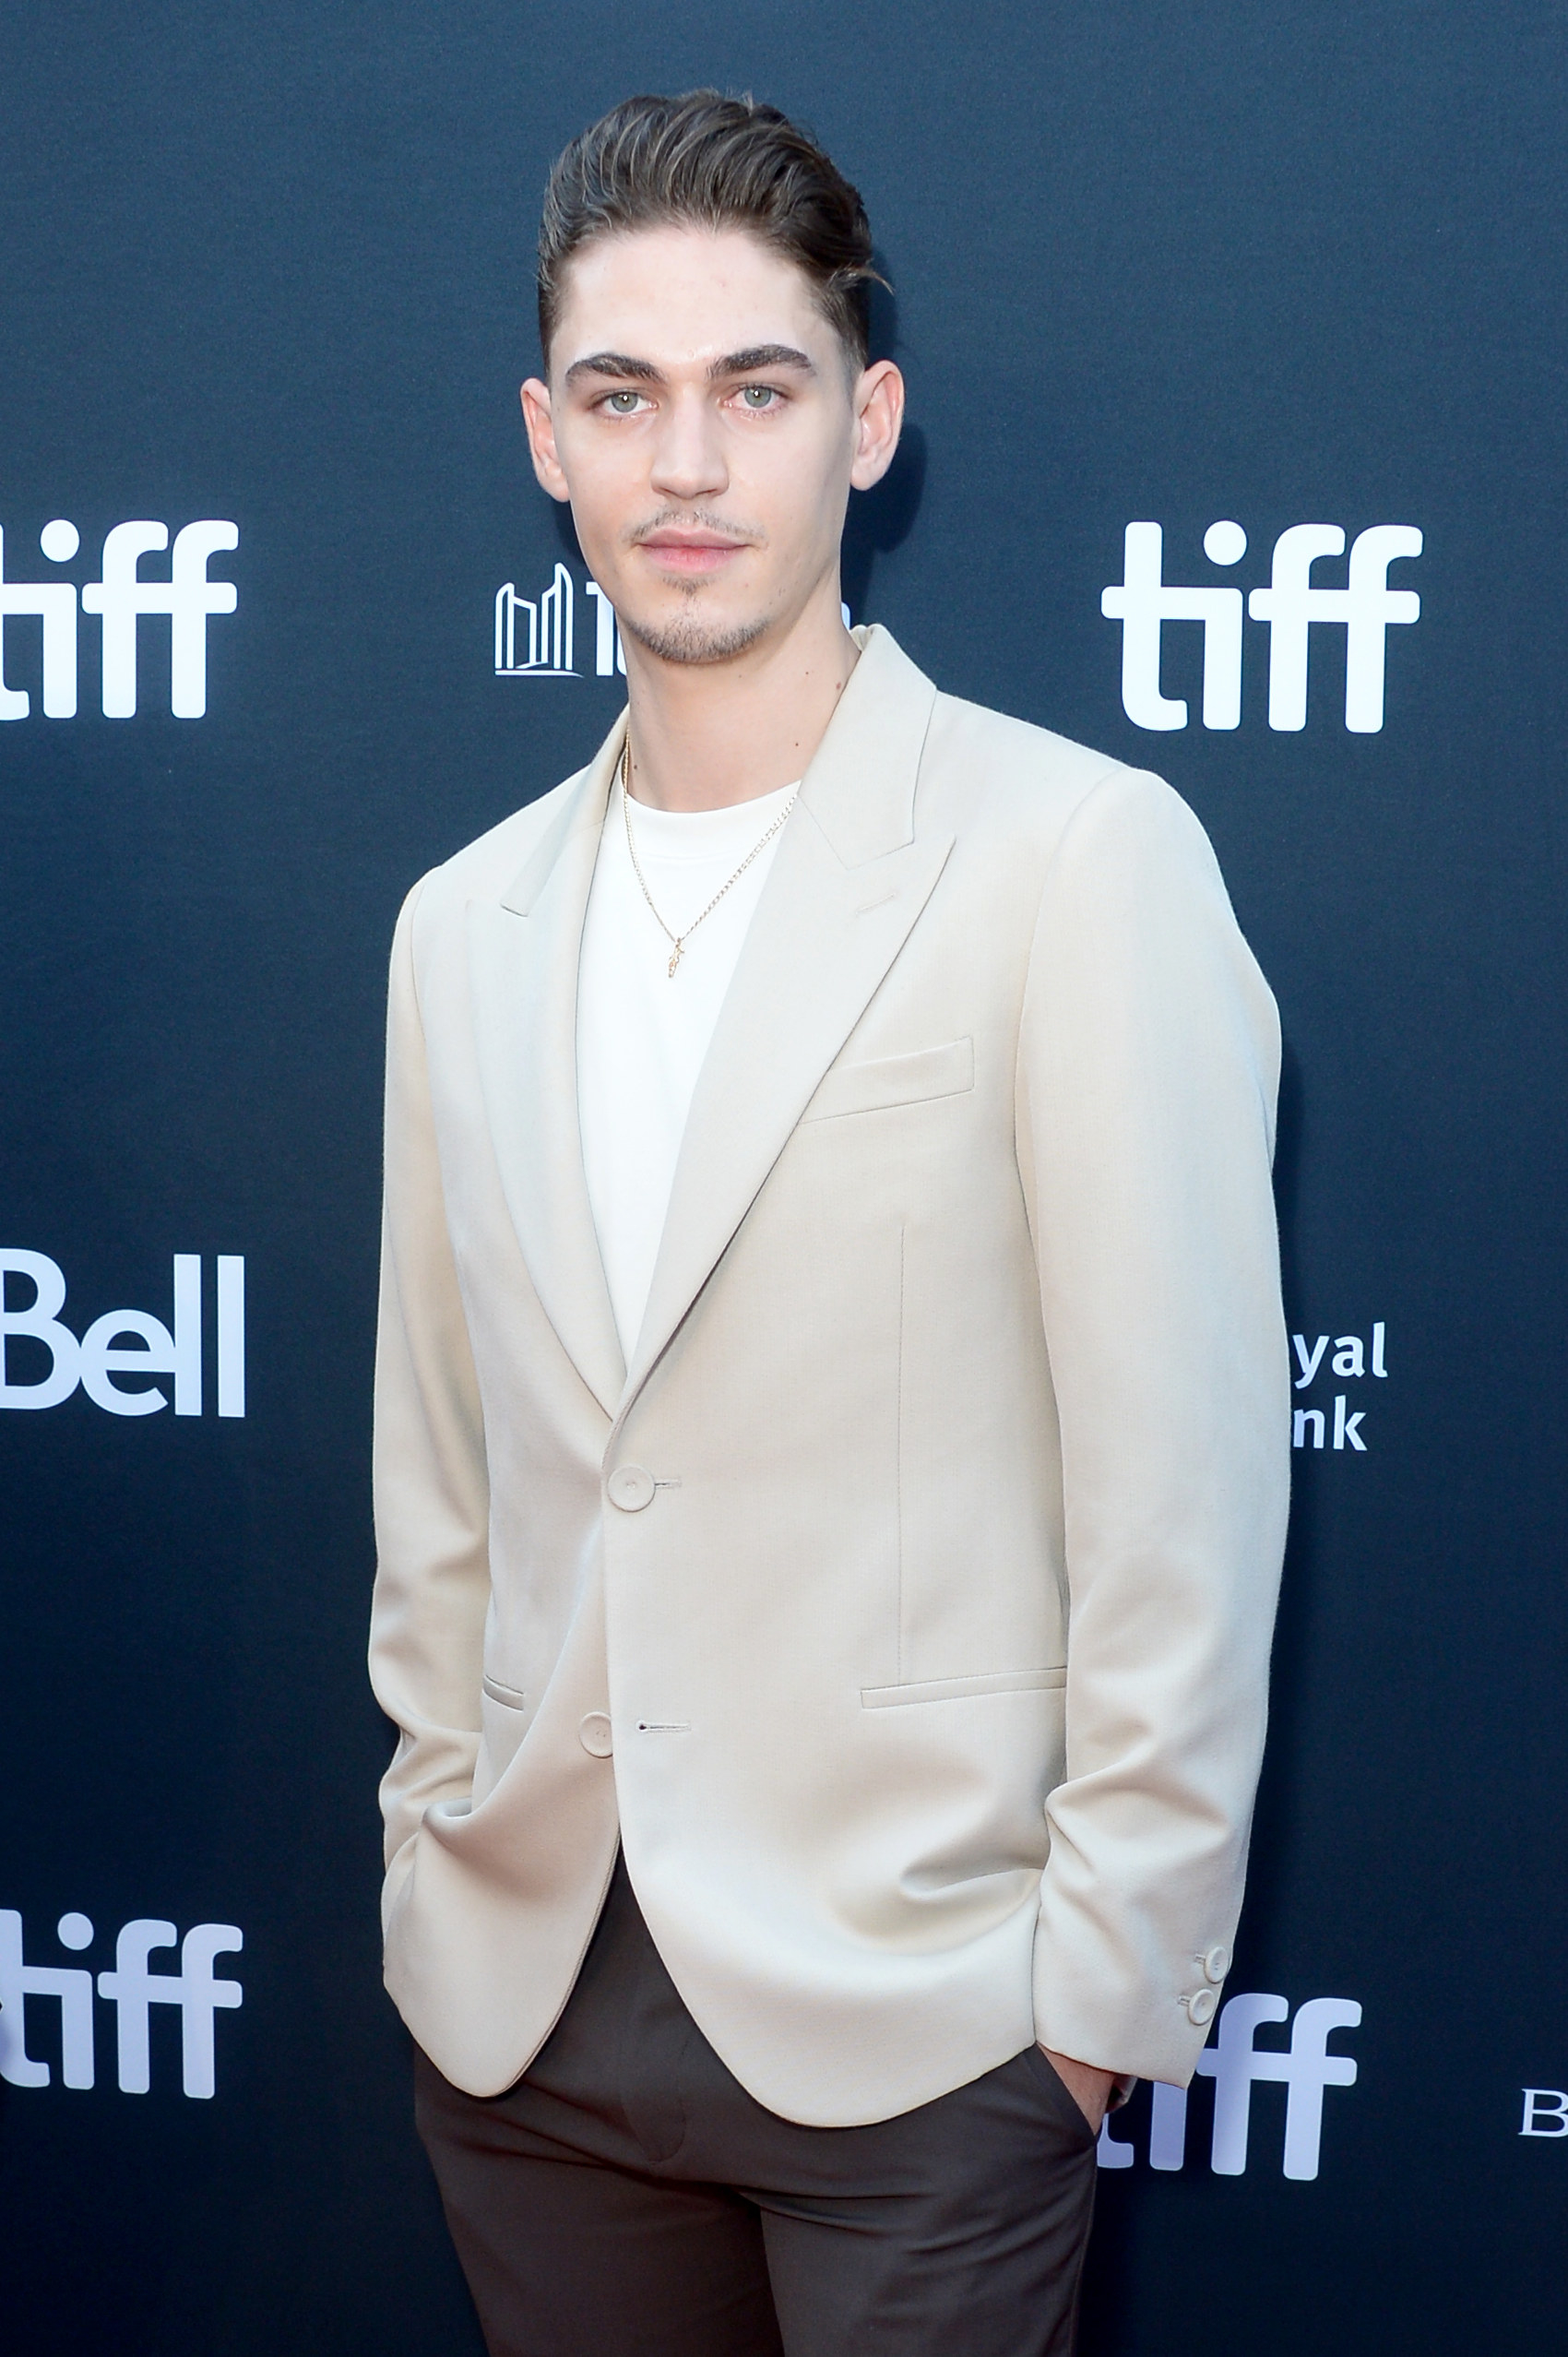 Hero Fiennes Tiffin on the red carpet